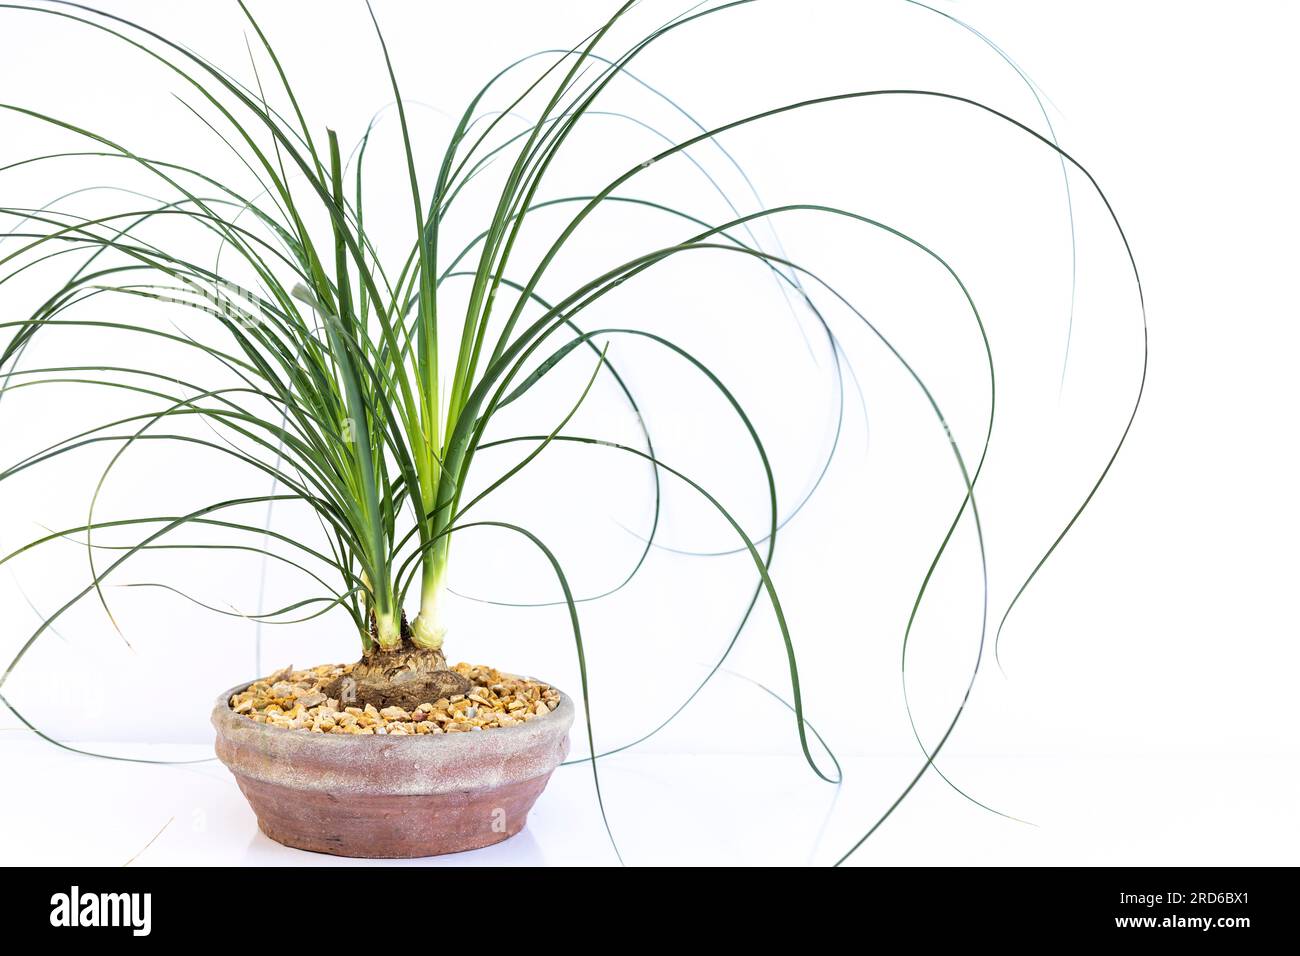 Ponytail palm Beaucarnea Recurvata isolated on a white background Stock Photo